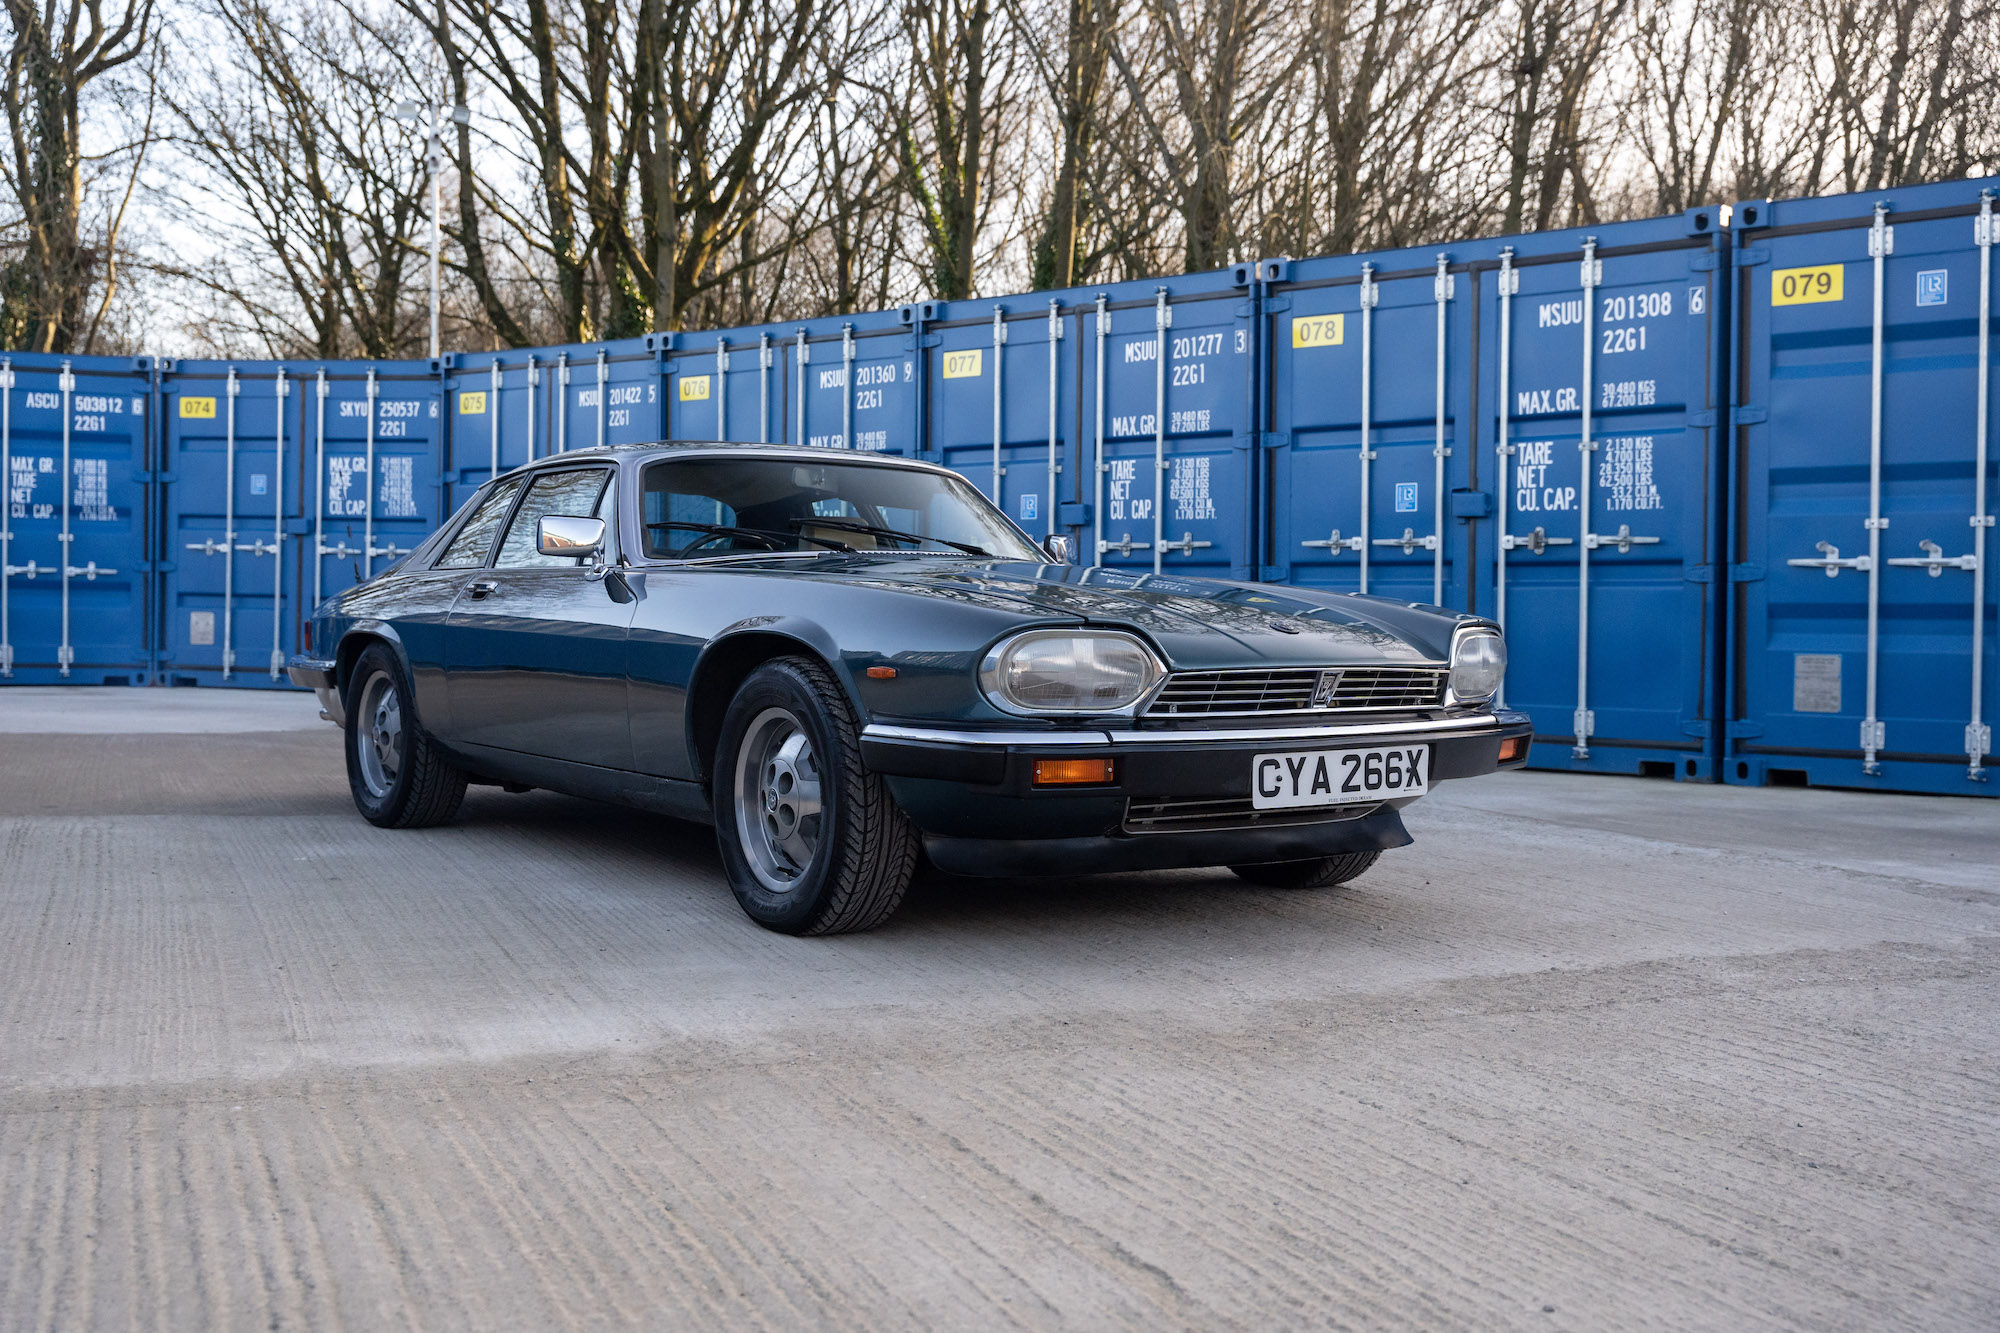 1982 JAGUAR XJ-S HE V12 COUPE for sale by auction in Bolton 